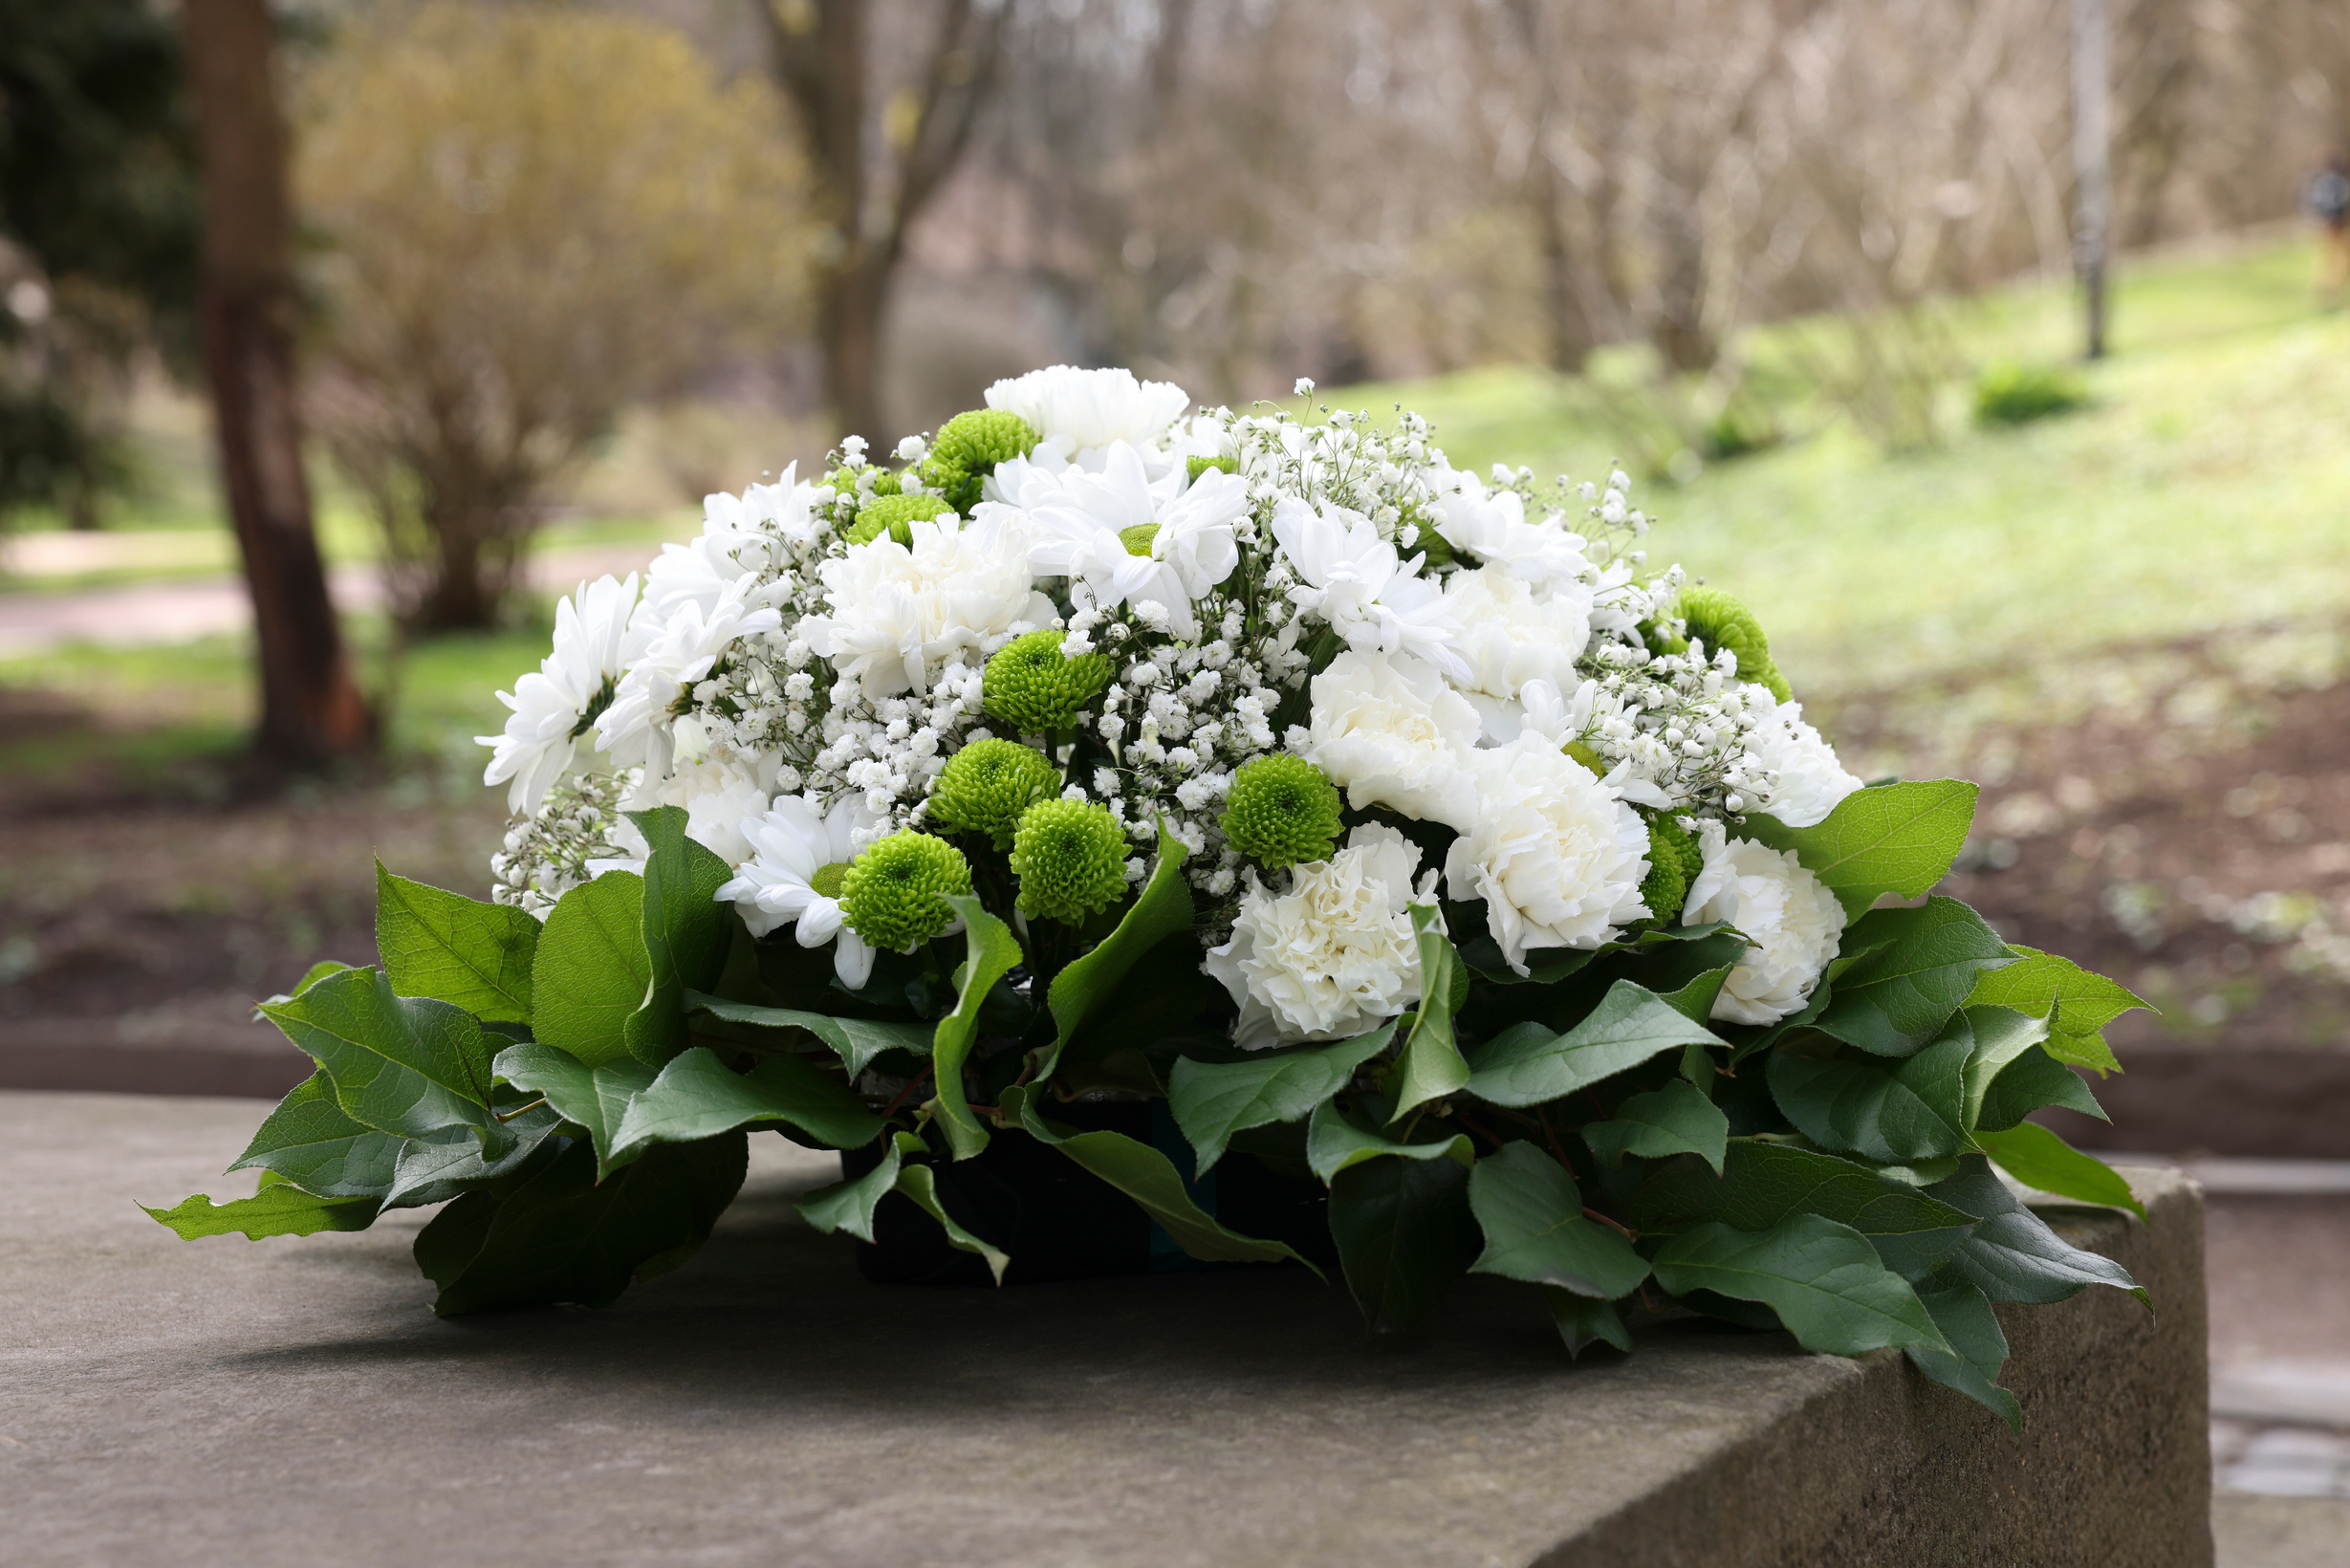 Funeral Wreath of Flowers on Tombstone Outdoors